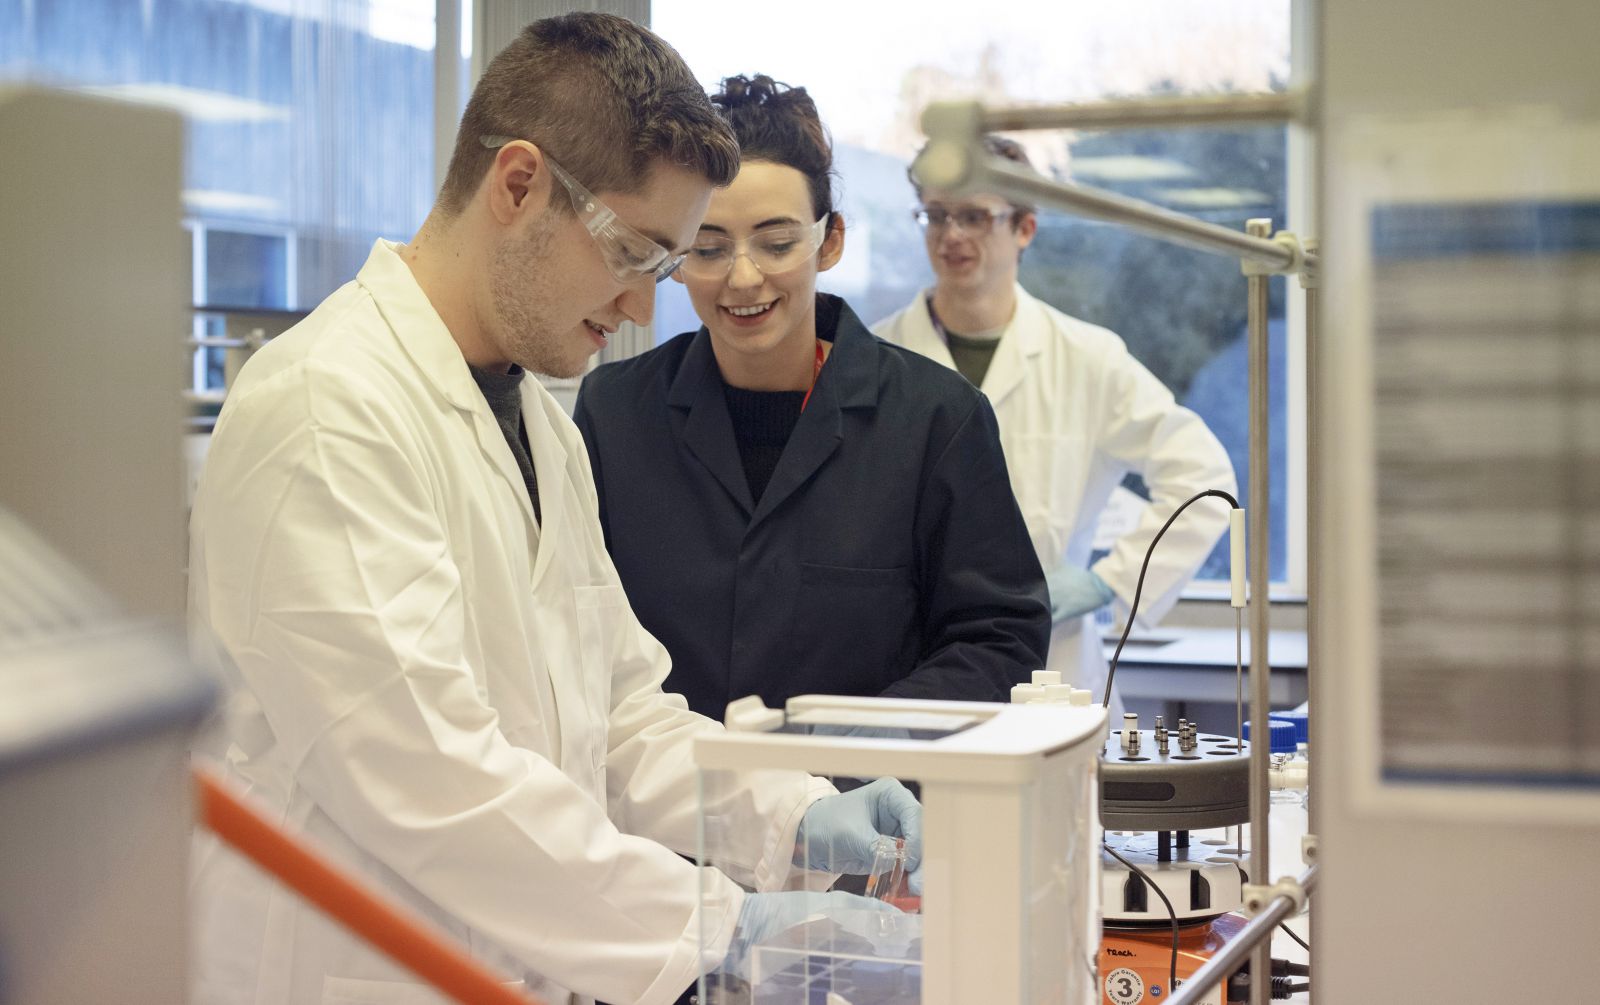 Male and female student in a lab, goggles on, handling test tubes